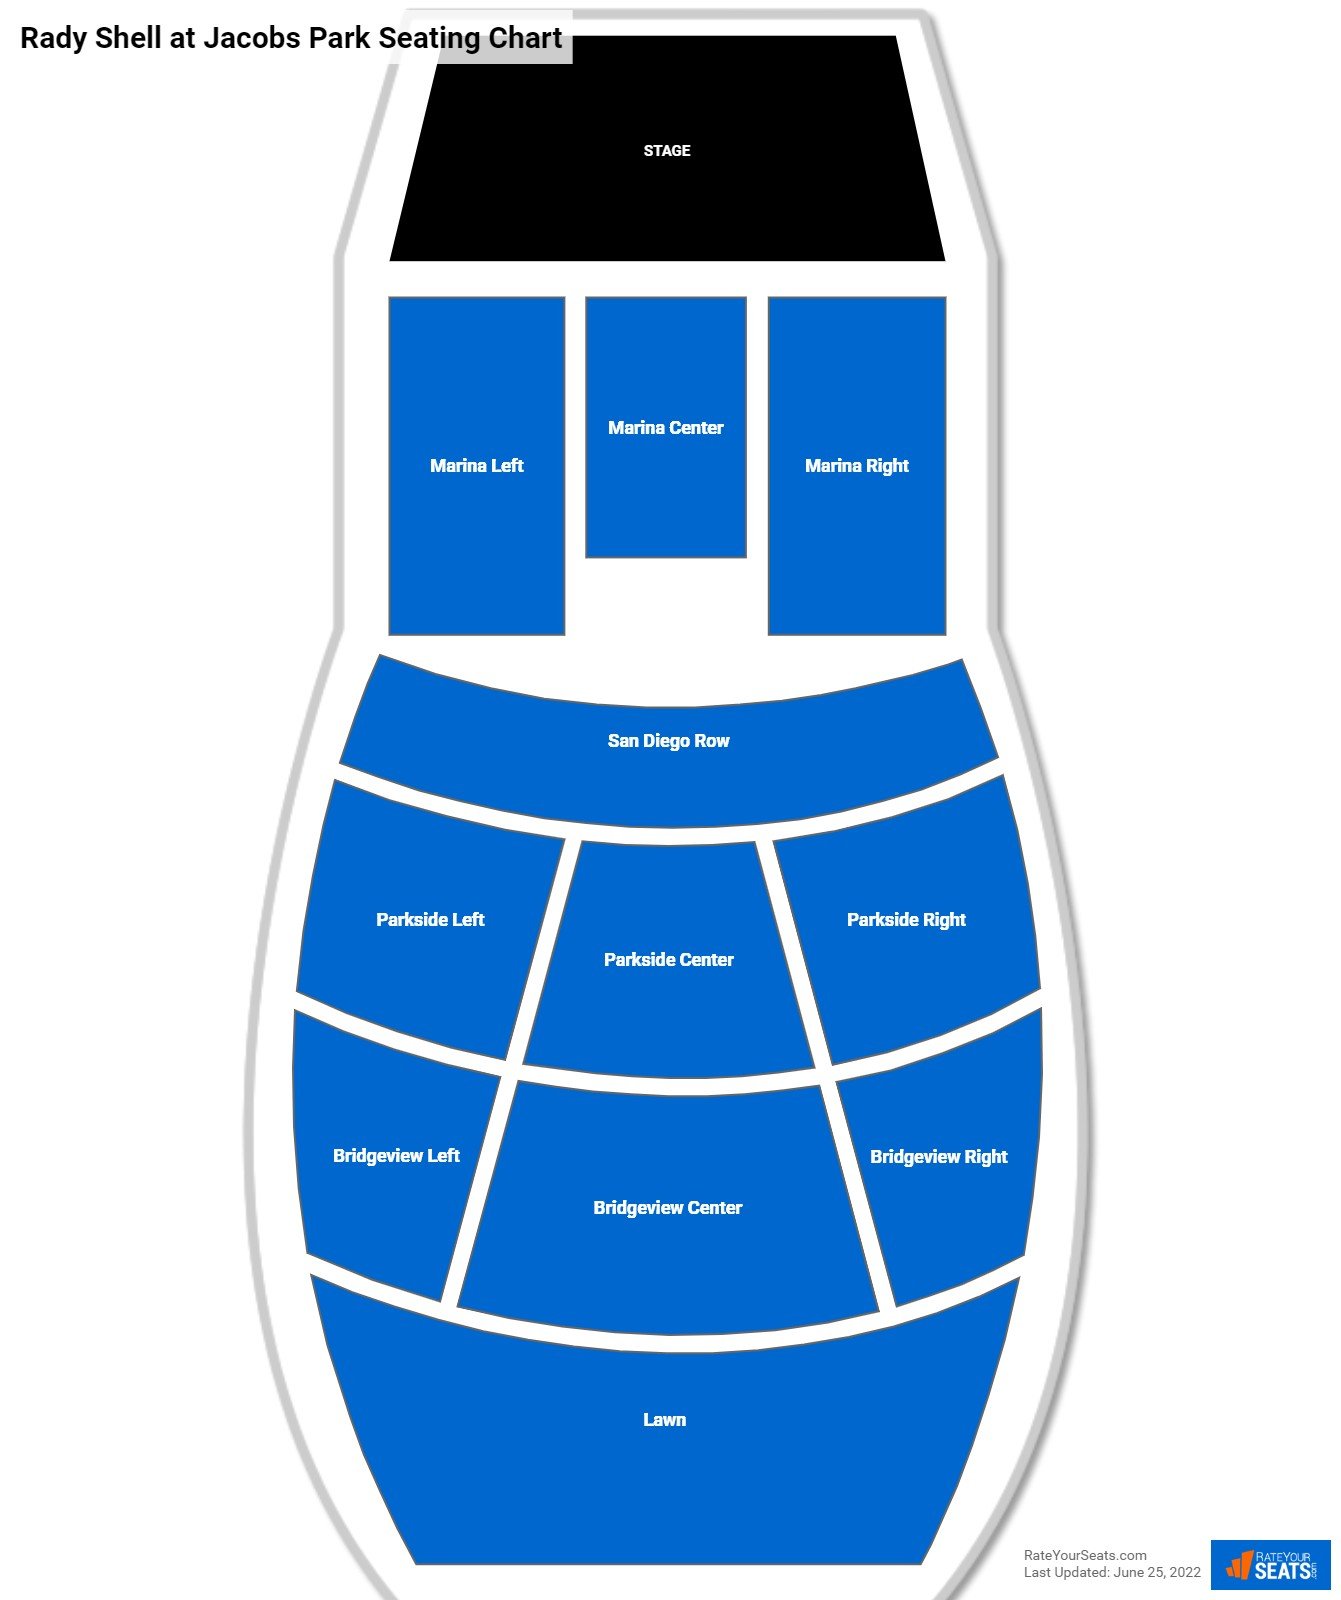 Rady Shell at Jacobs Park Concert Seating Chart